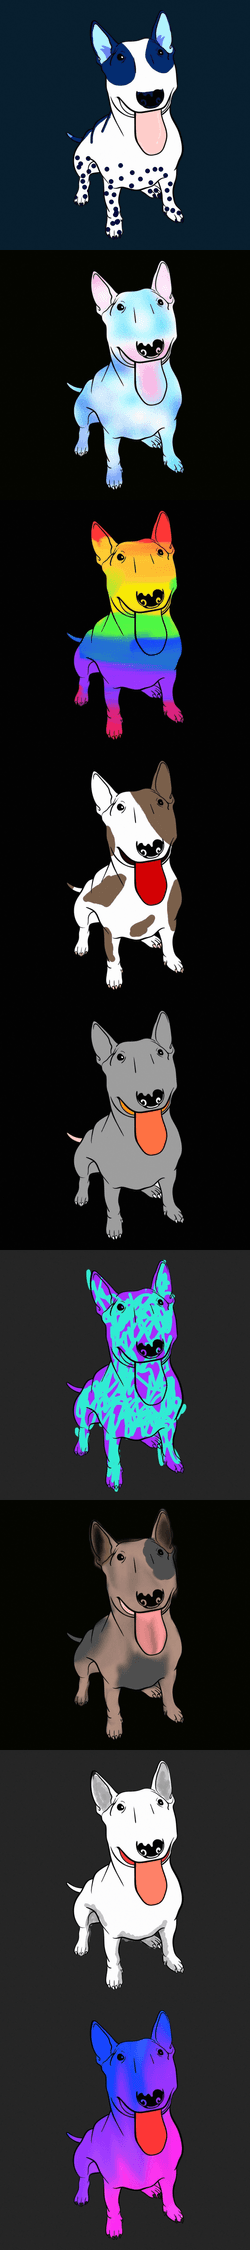 The Bull Terrier Squad collection image